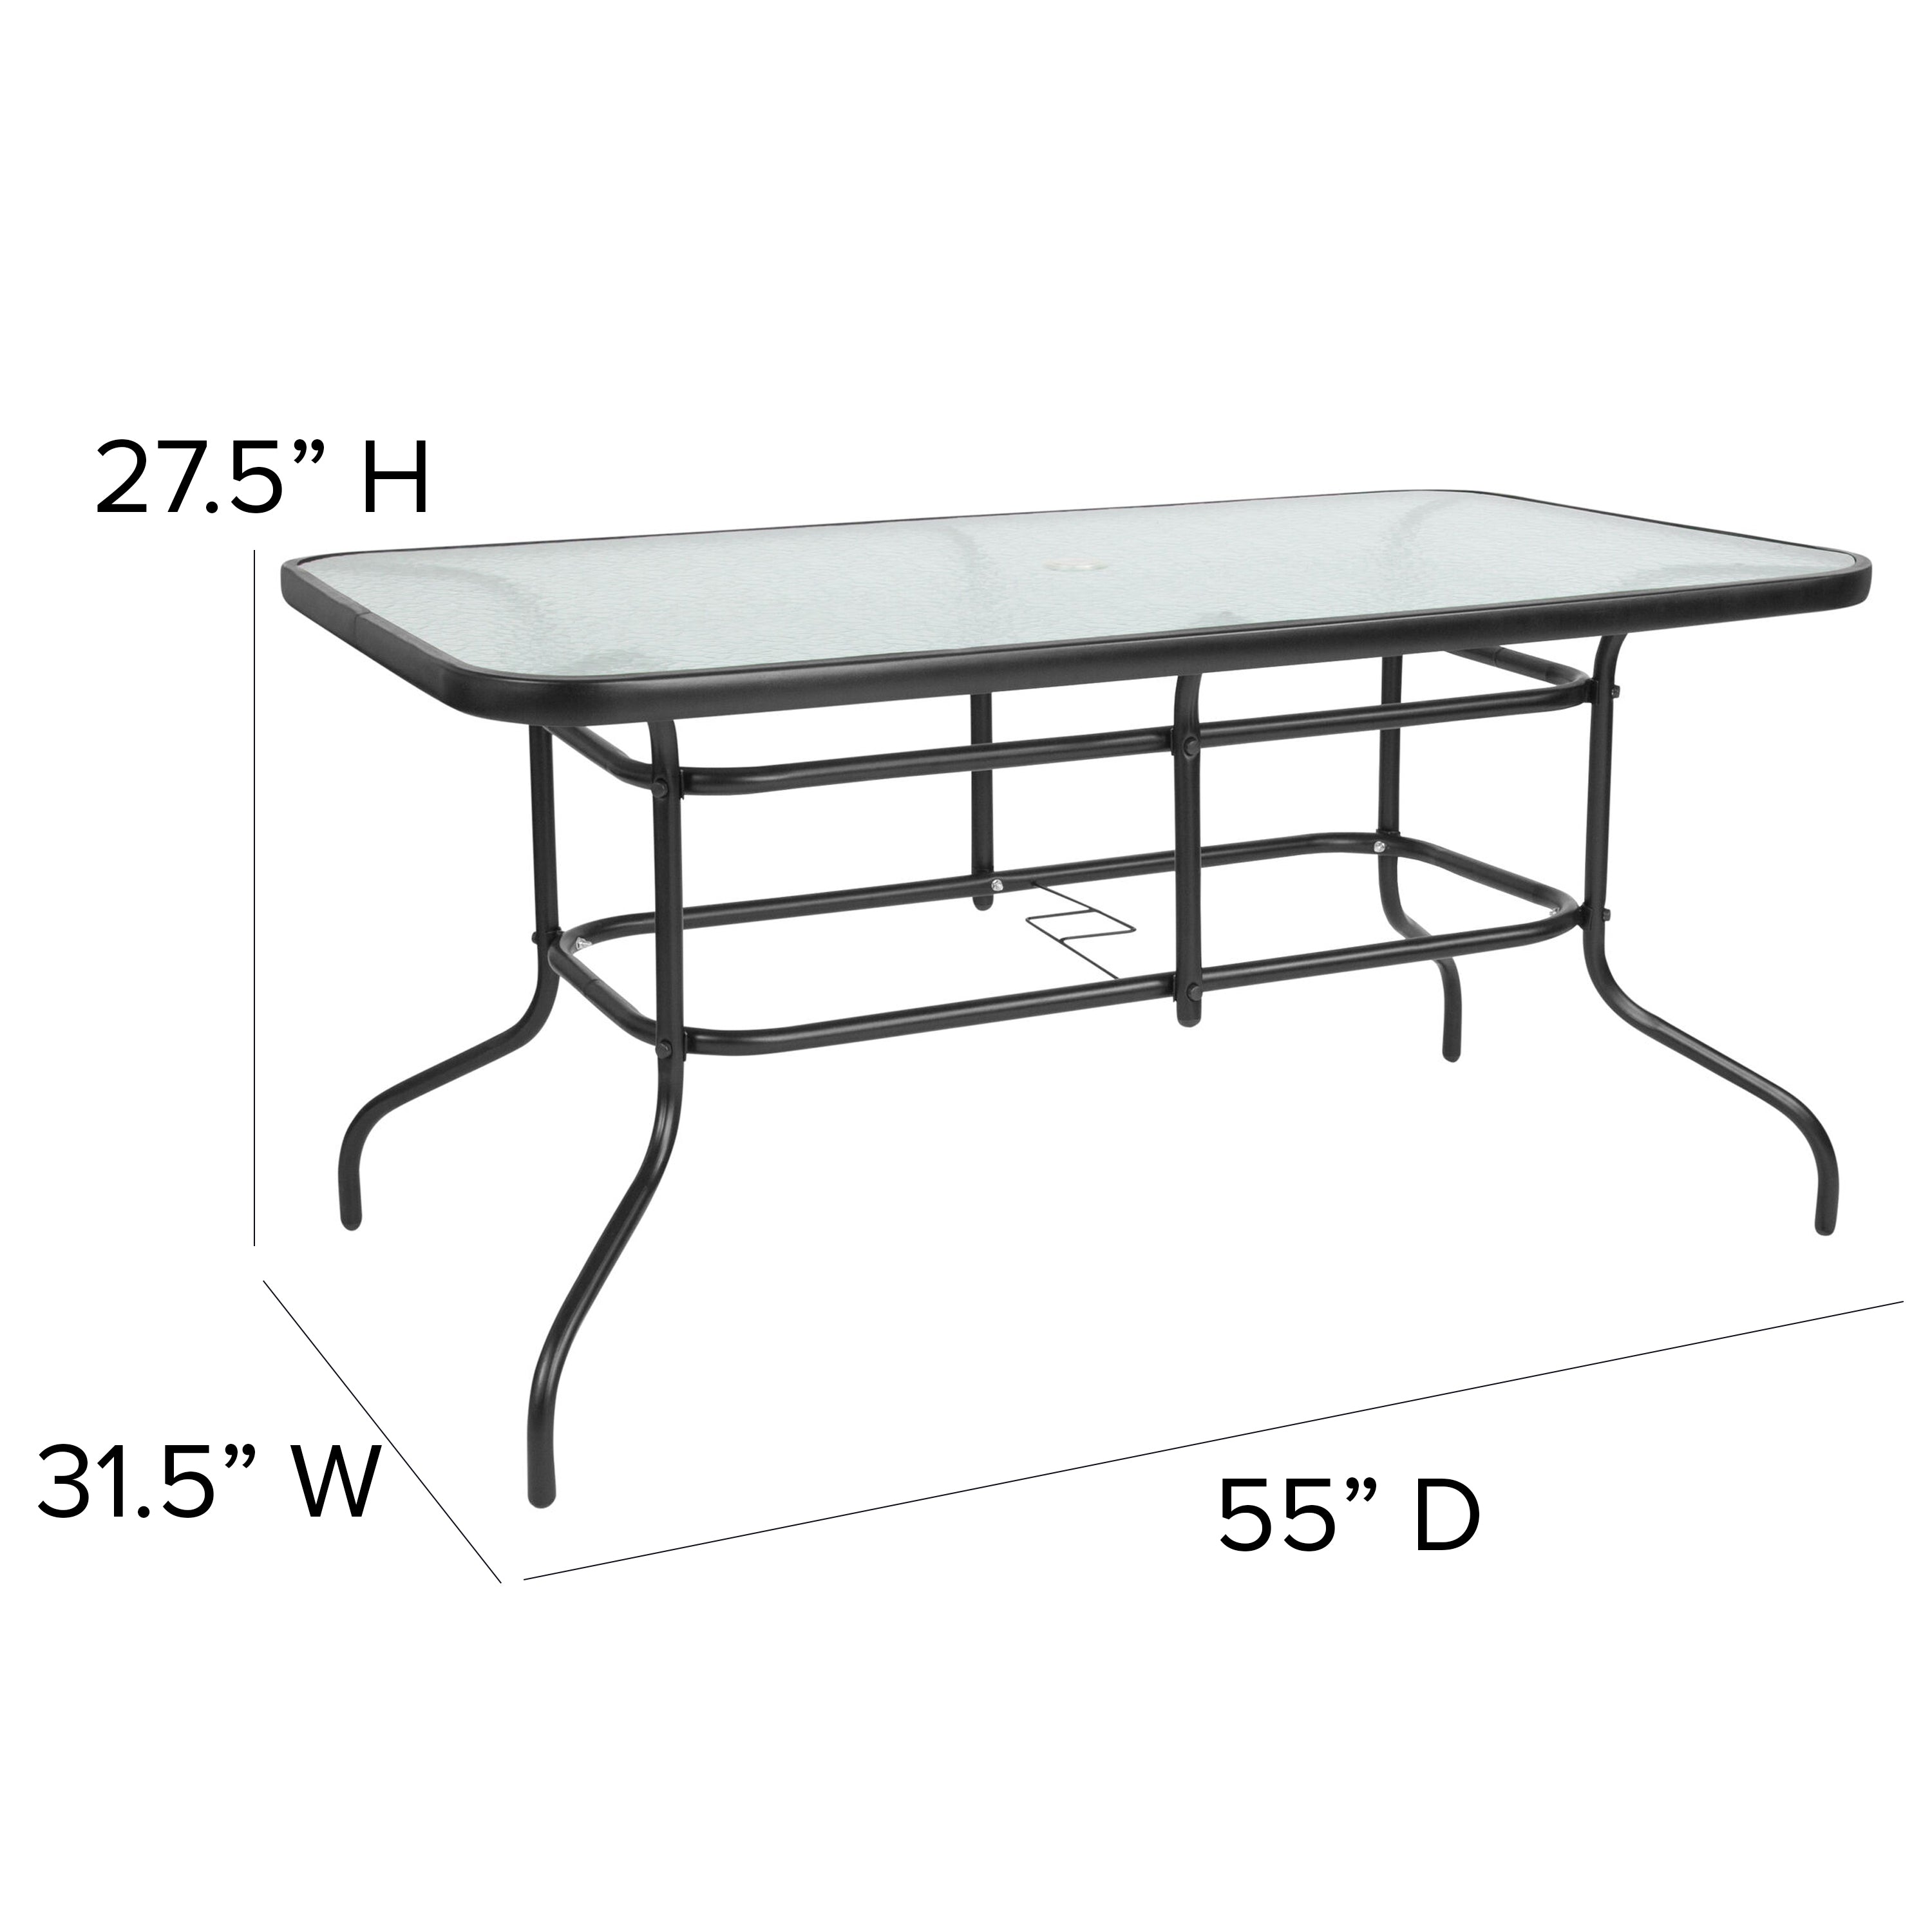 Tory 31.5" x 55" Rectangular Tempered Glass Metal Table with Umbrella Hole-Indoor/Outdoor Tables-Flash Furniture-Wall2Wall Furnishings